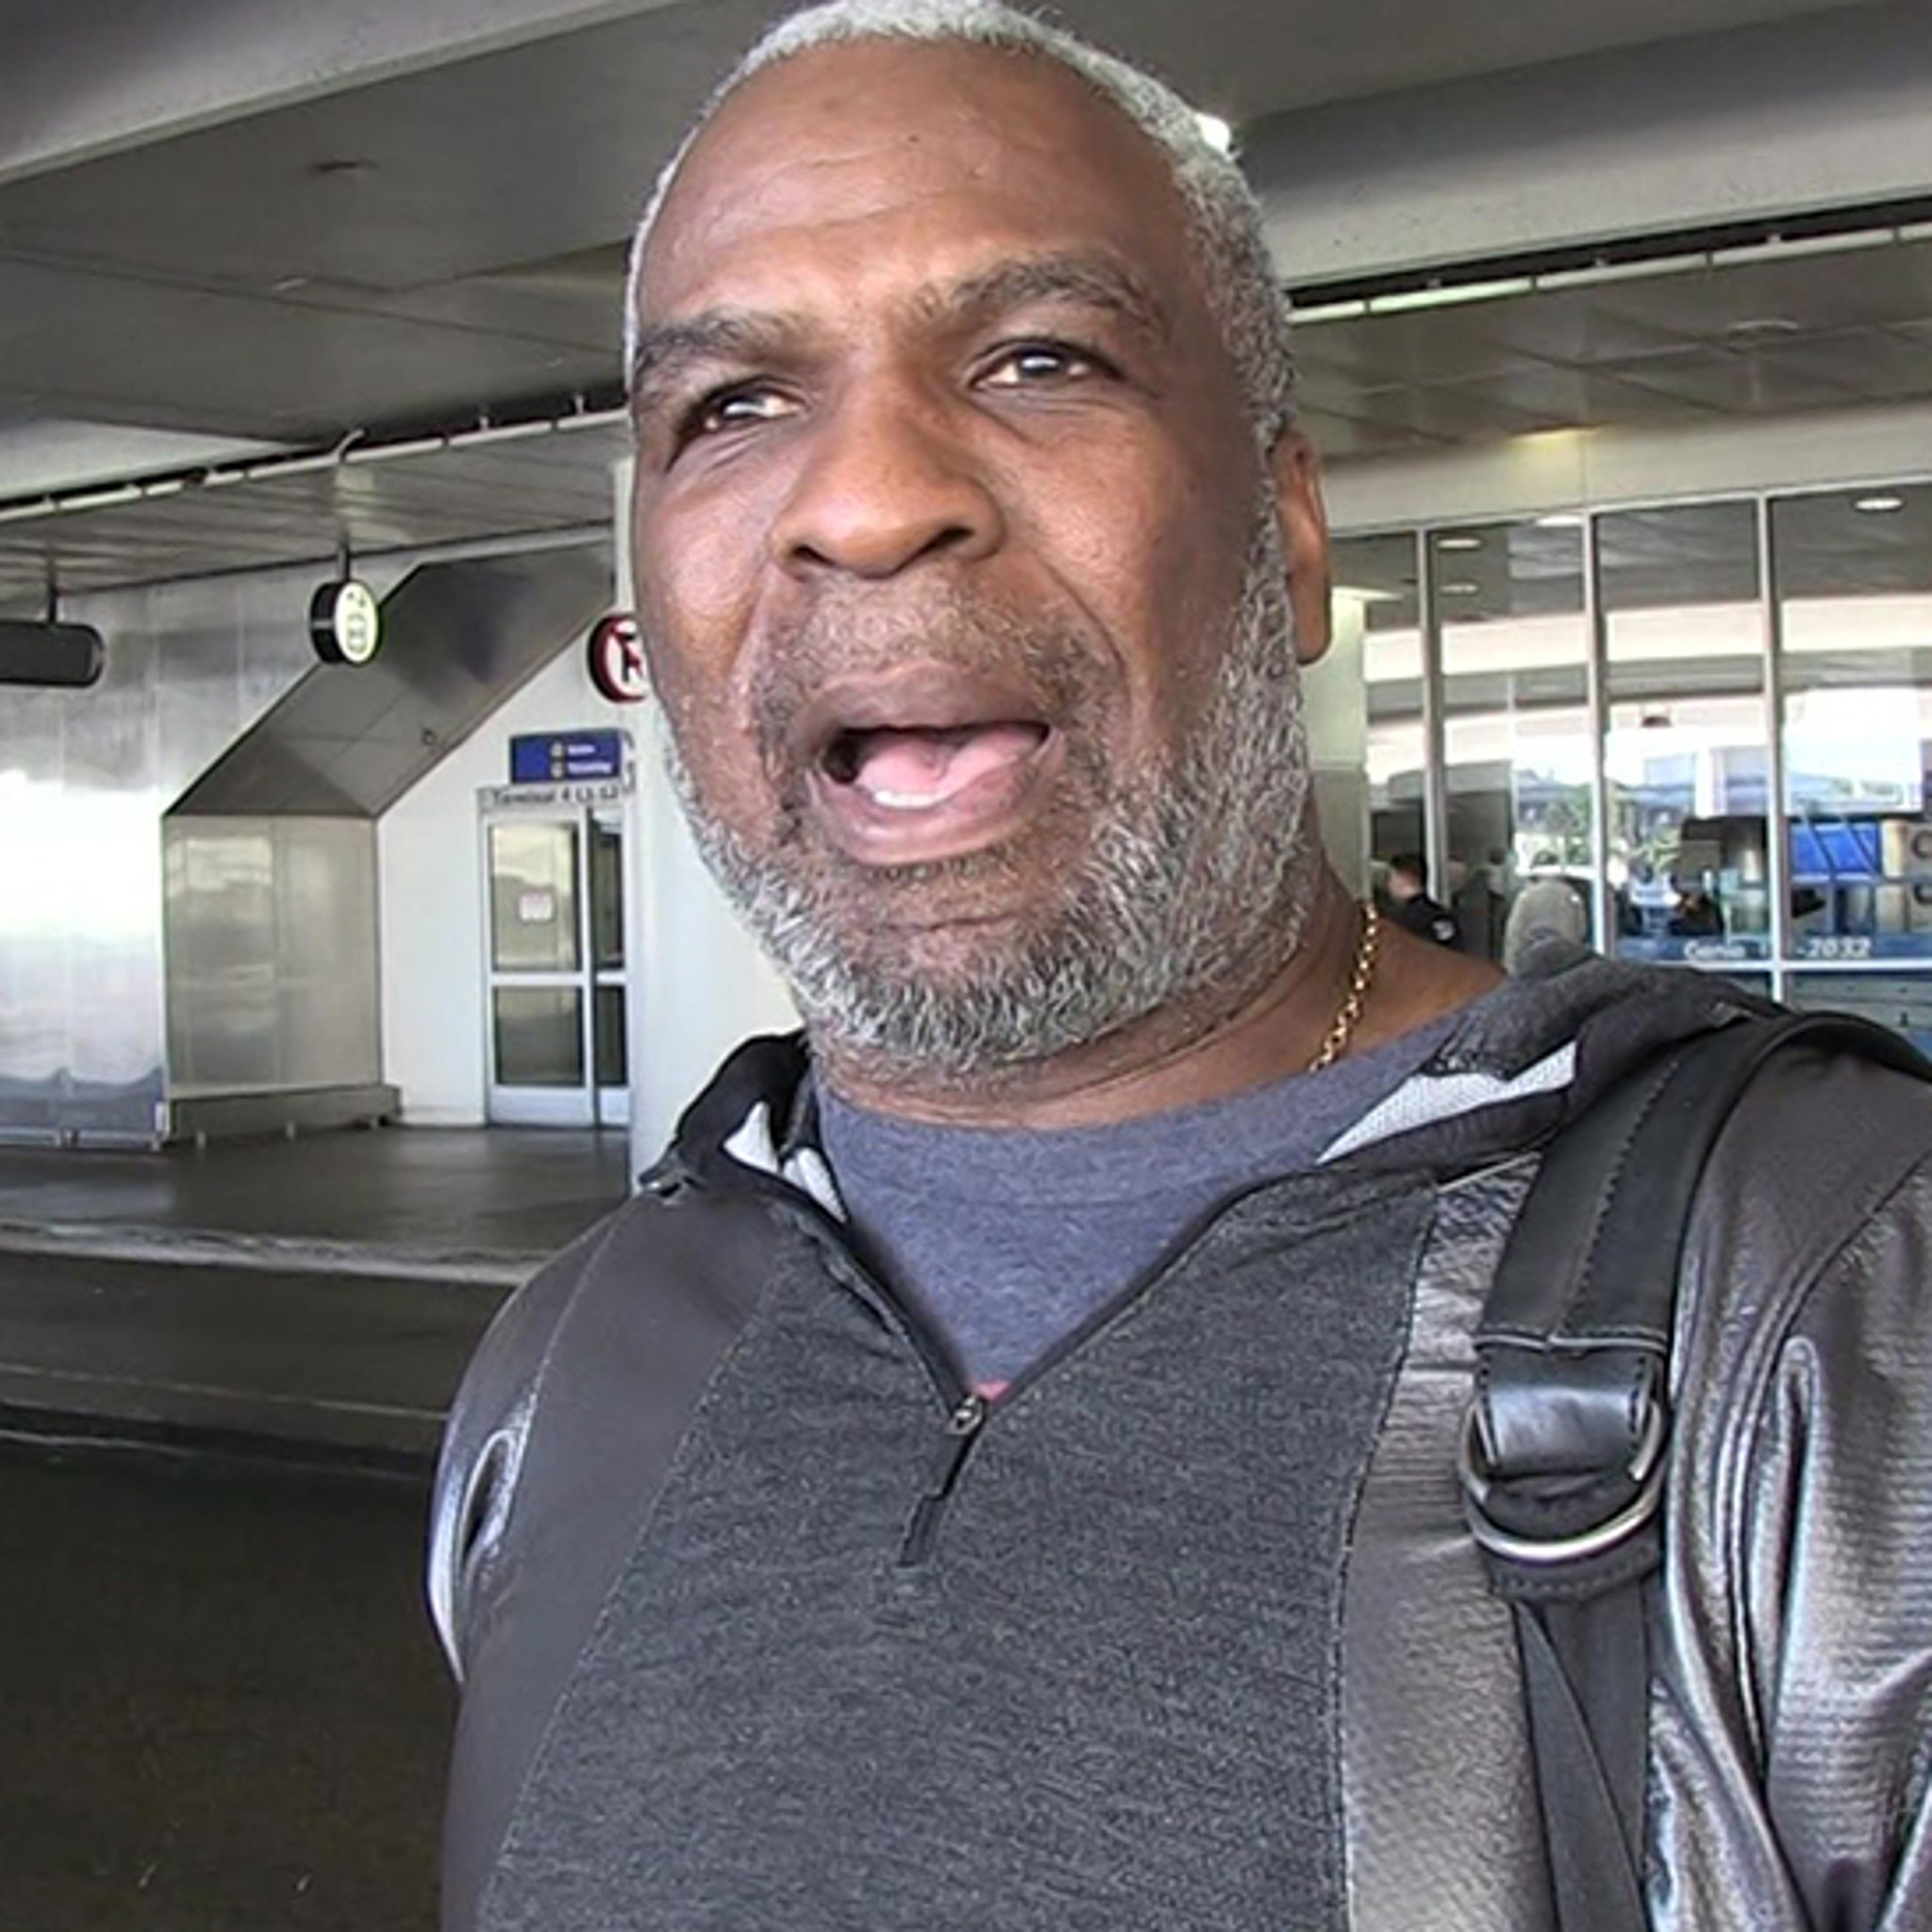 Charles Oakley Cheated 3 Times During Texas Hold'Em, Officials Say